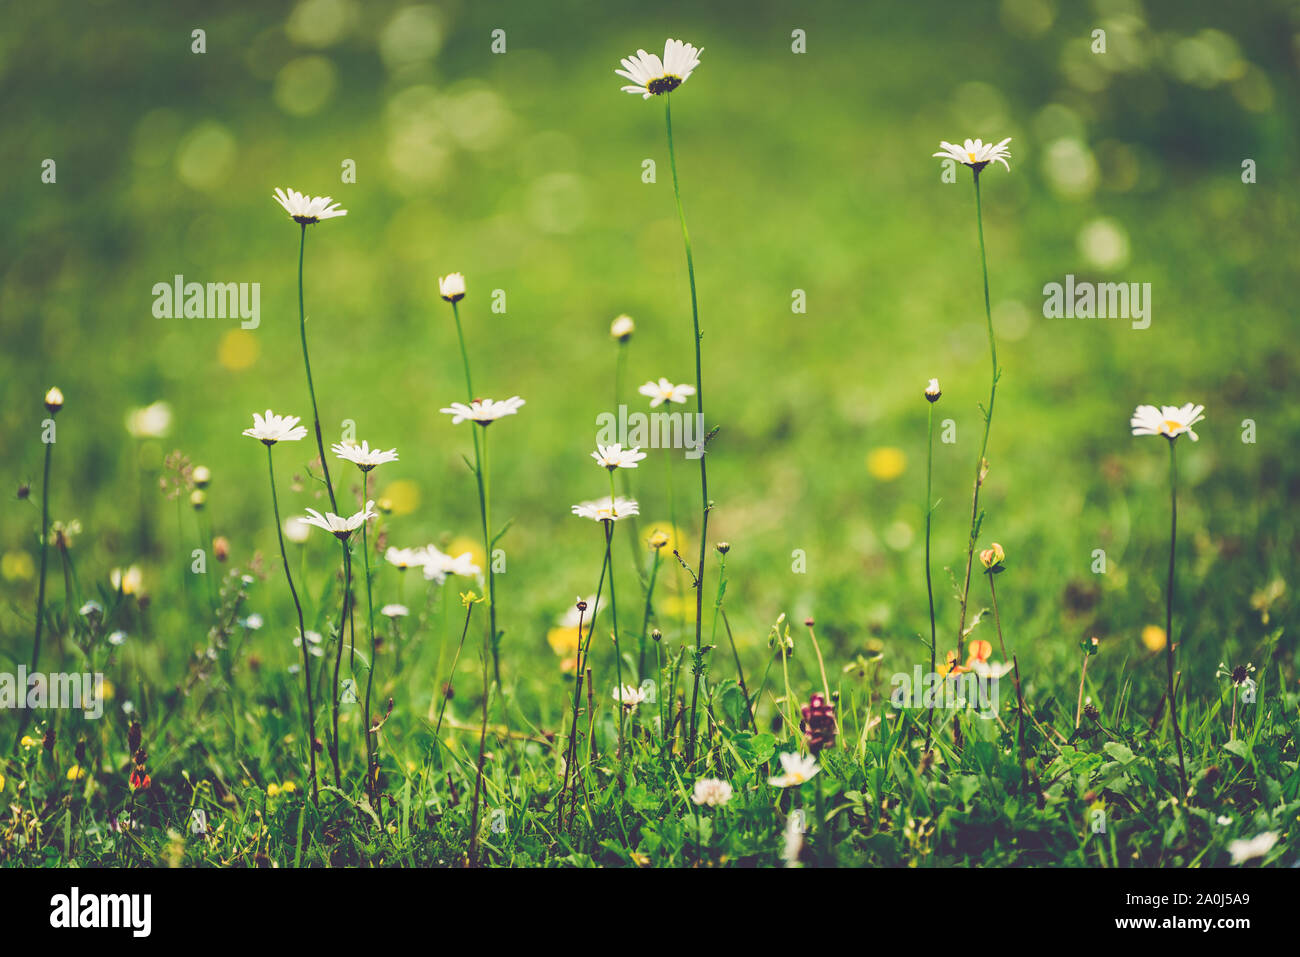 Vintage floral background with white daisies. Chamomile flowers on a green summer meadow. Herbal close-up of wildflowers and field grass. Stock Photo